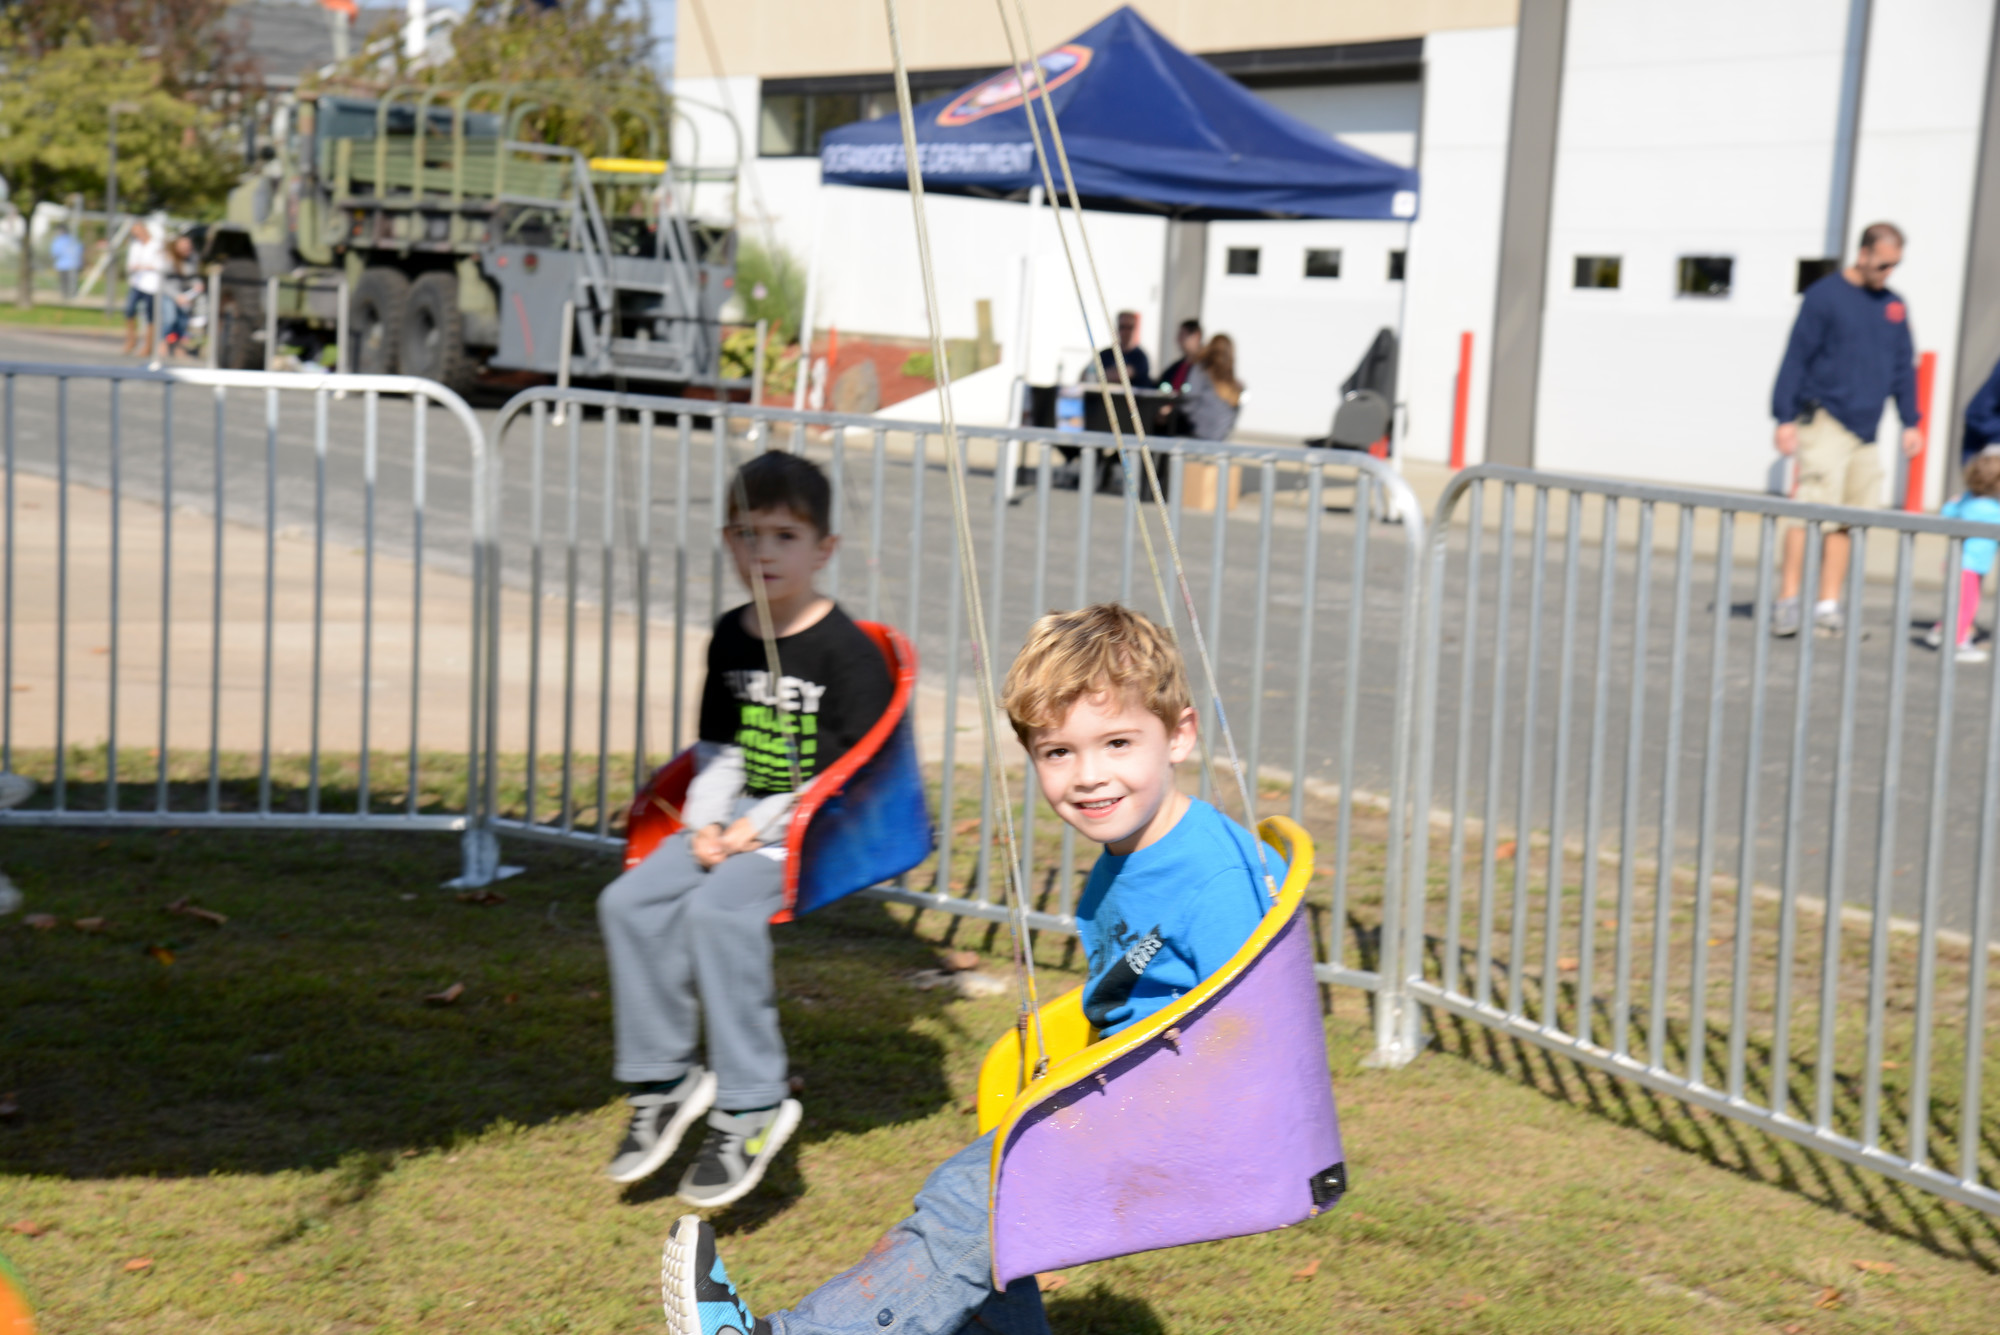 The Chamber Fair was a swinging good time for Oceanside brothers Jackson Langevin, 5, and Dylan, 4.